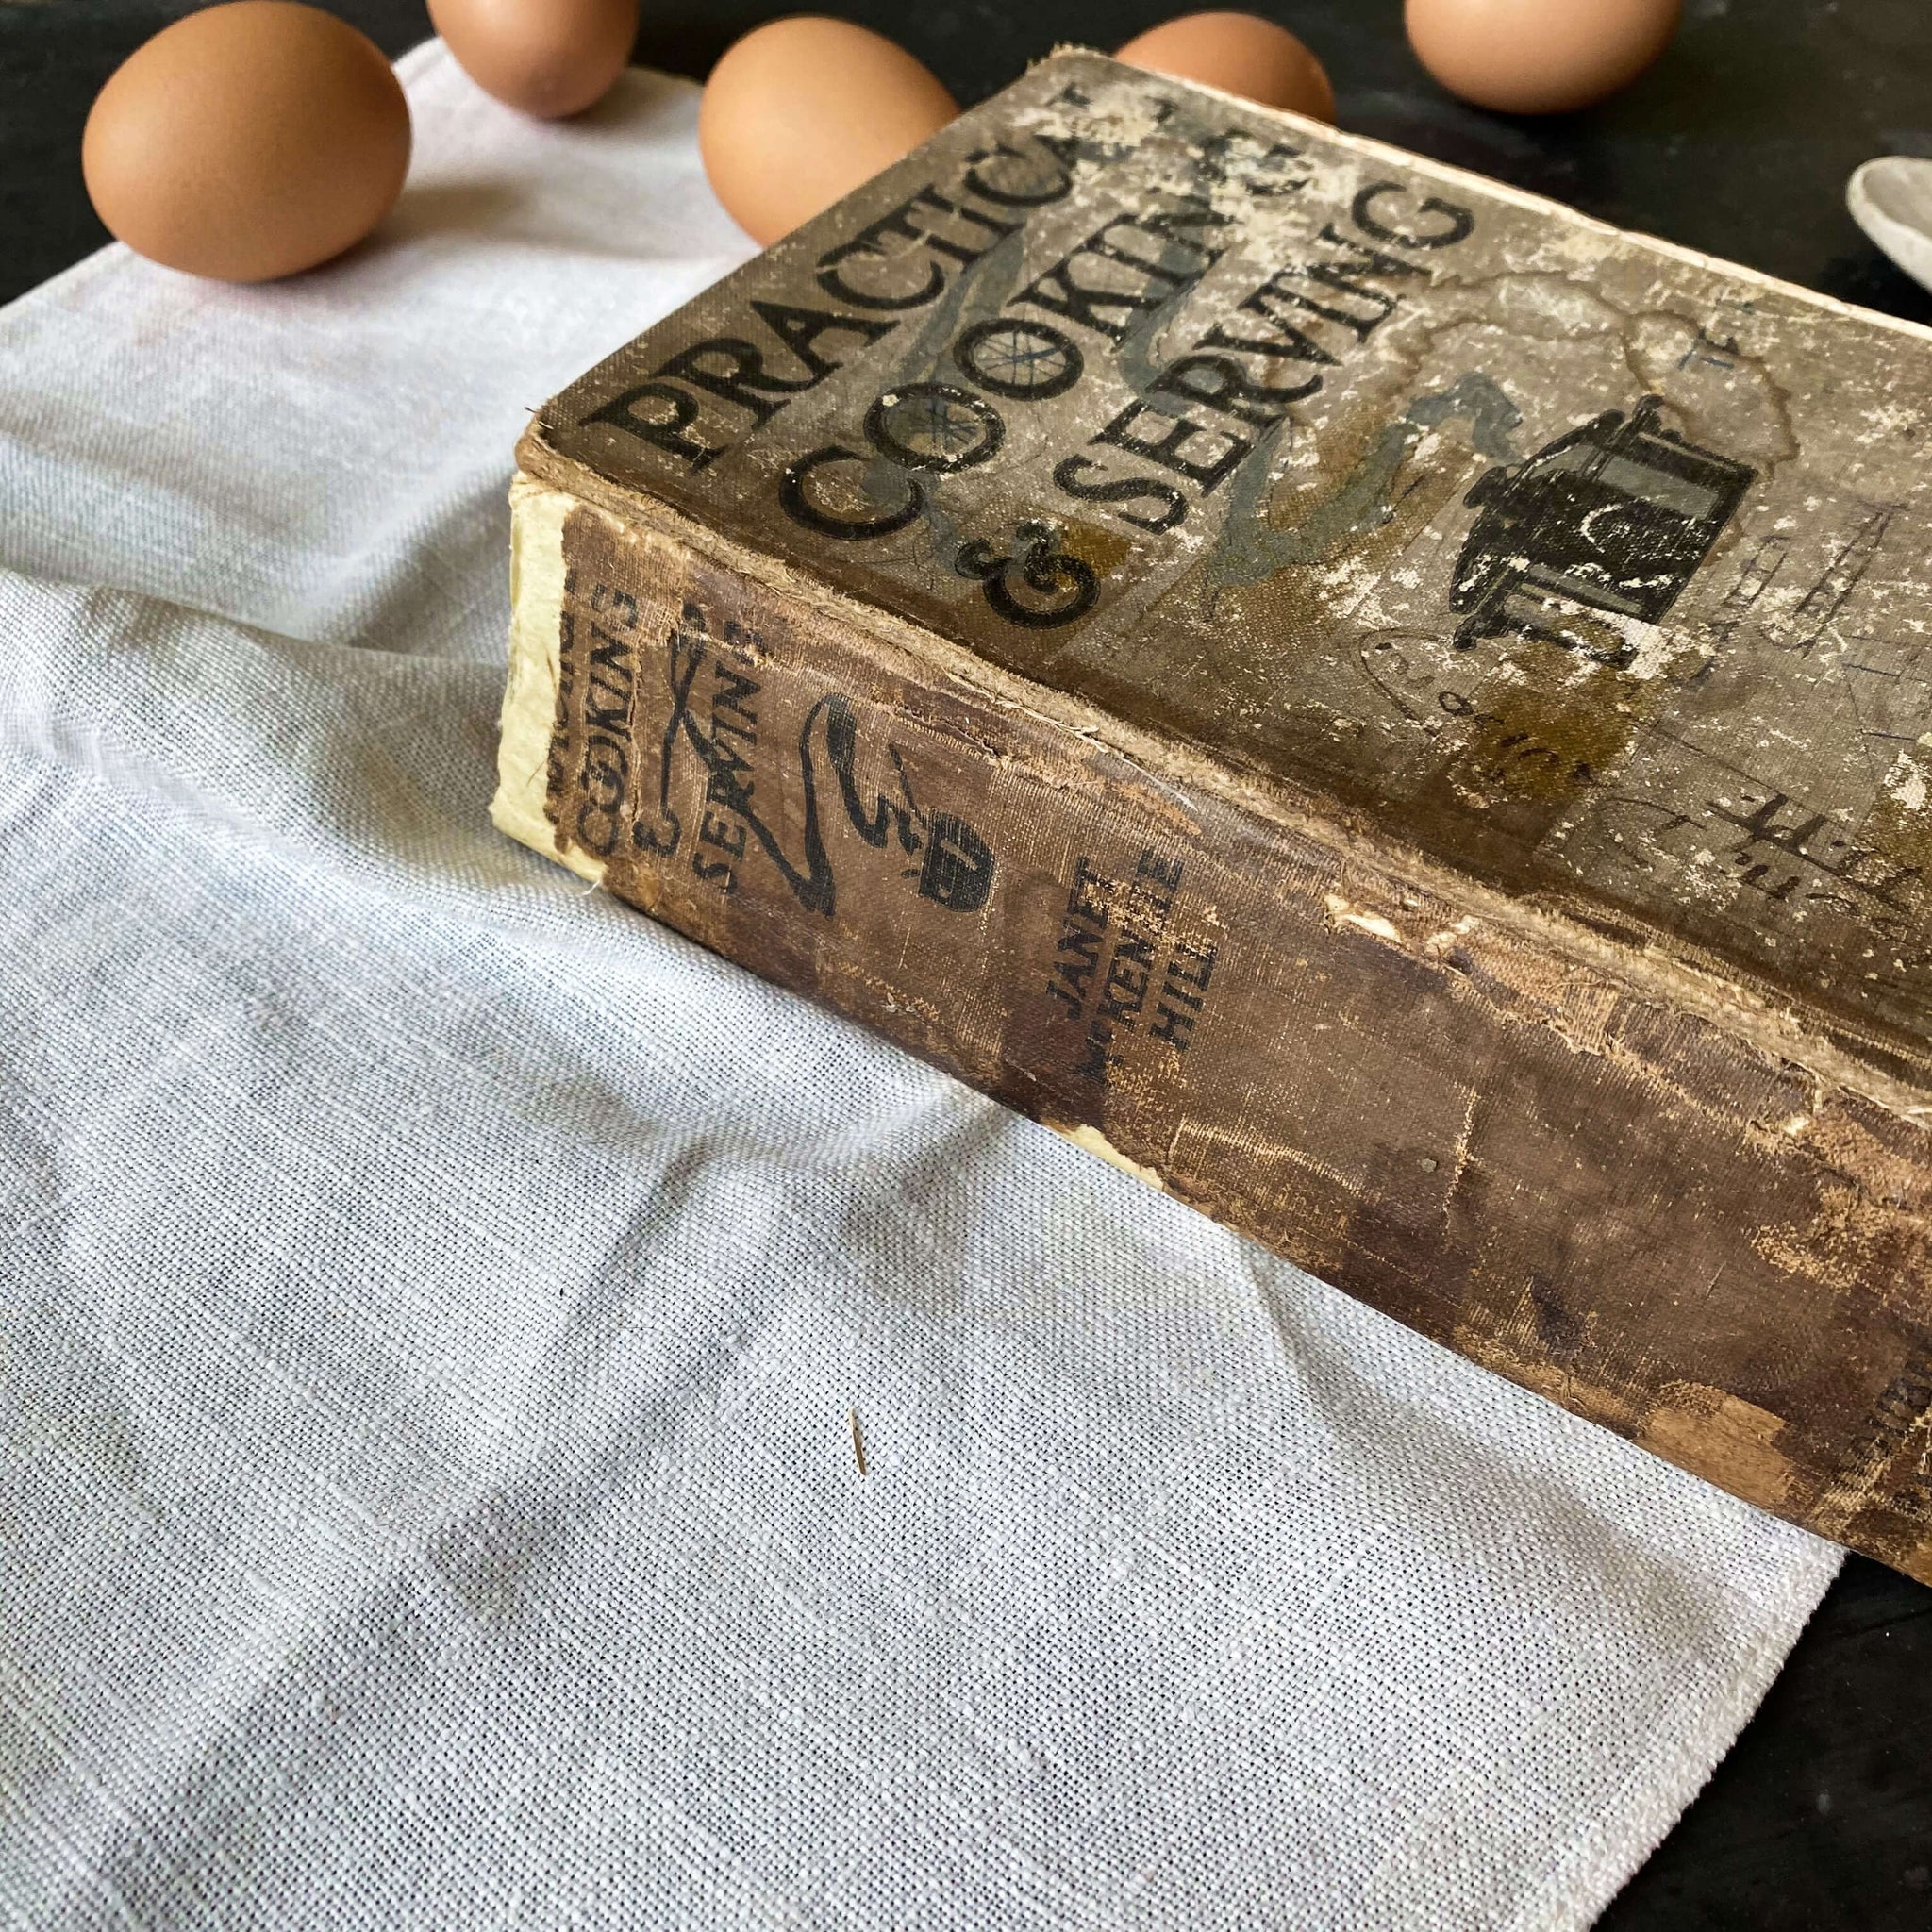 Rare Antique 1920s Cookbook - Practical Cooking & Serving - Janet McKenzie Hill - 1923 Edition